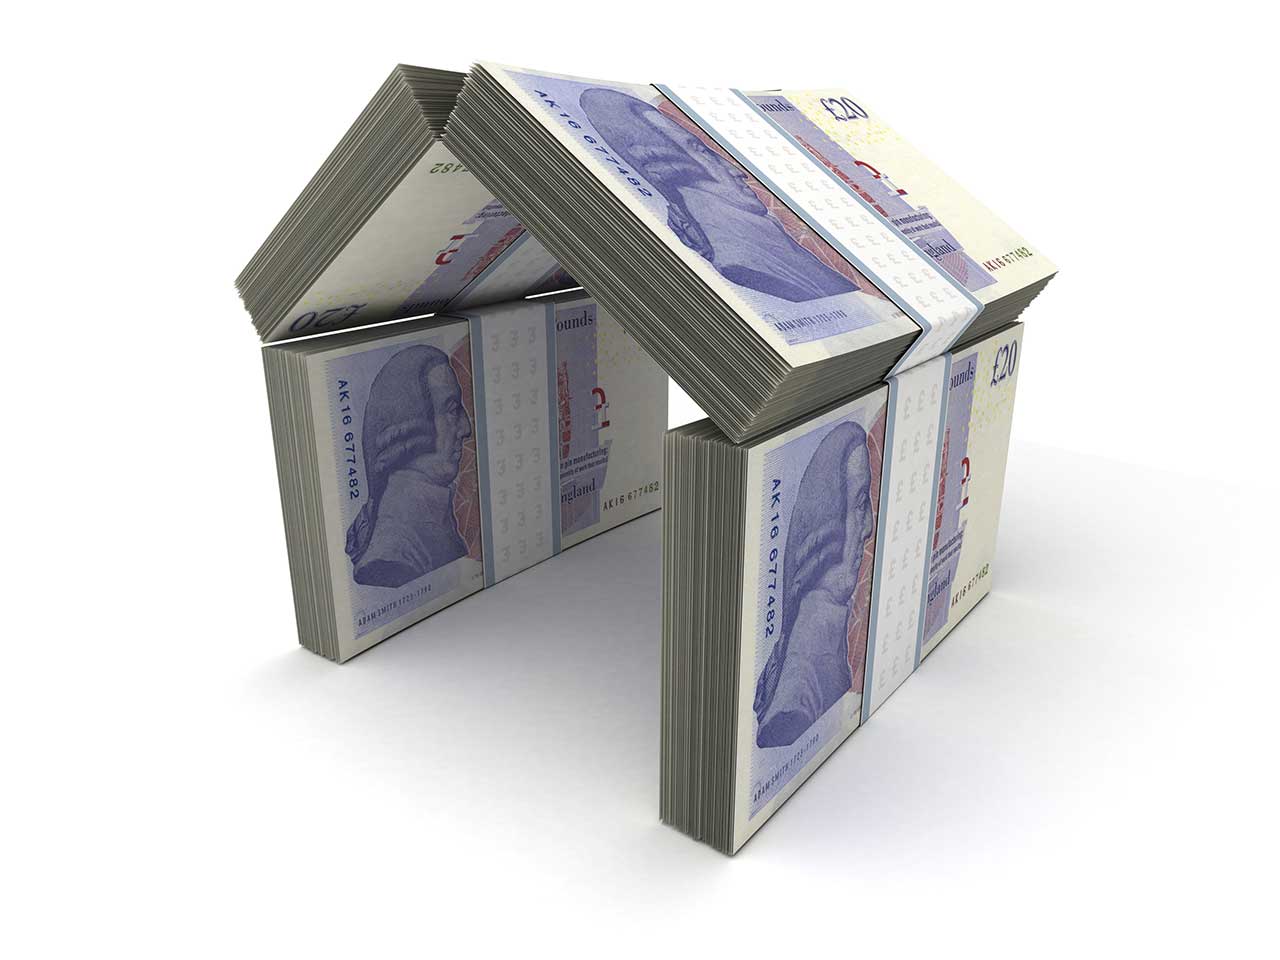 House built out of twenty pound notes